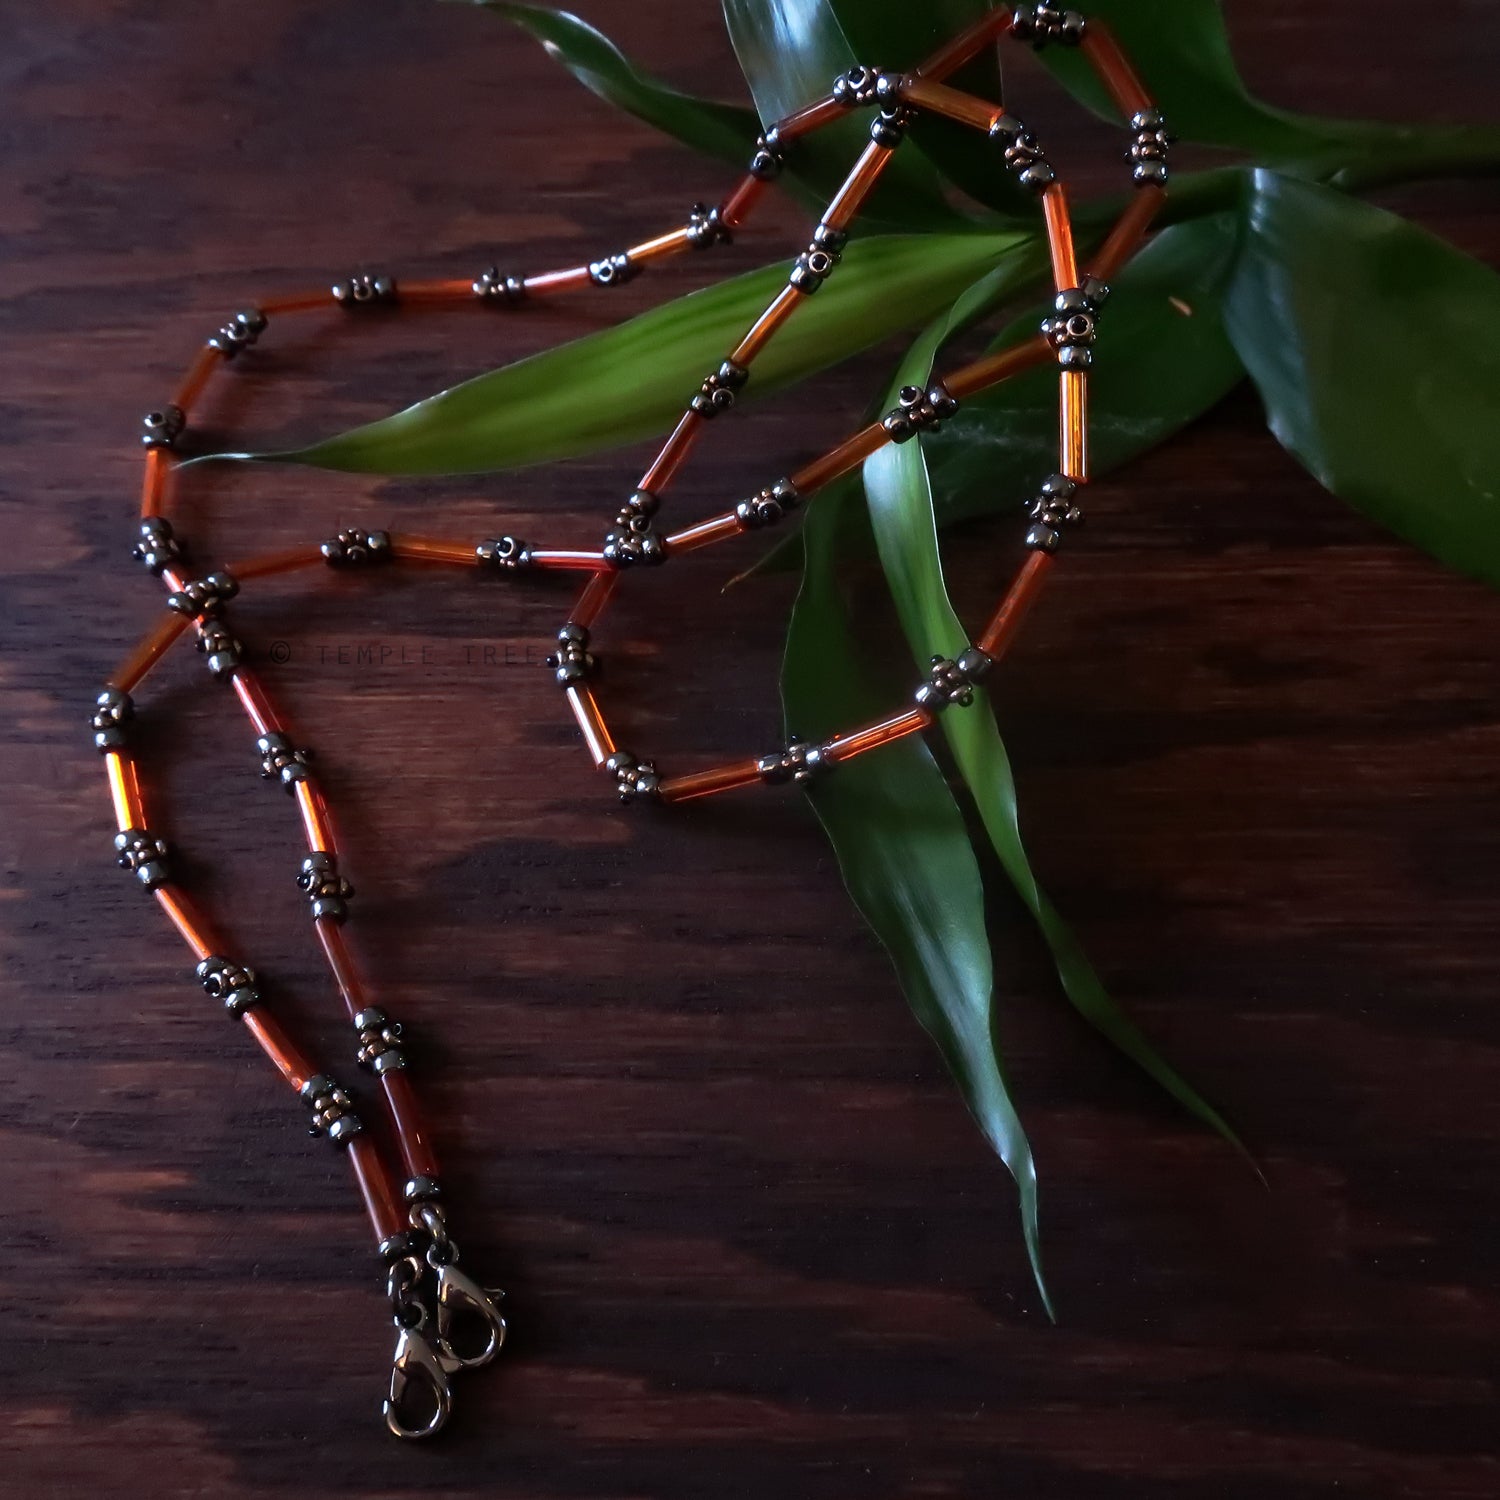 Temple Tree Lost Circuitry Beadwoven Lanyard with Rivets - trAnsist0r 38v1